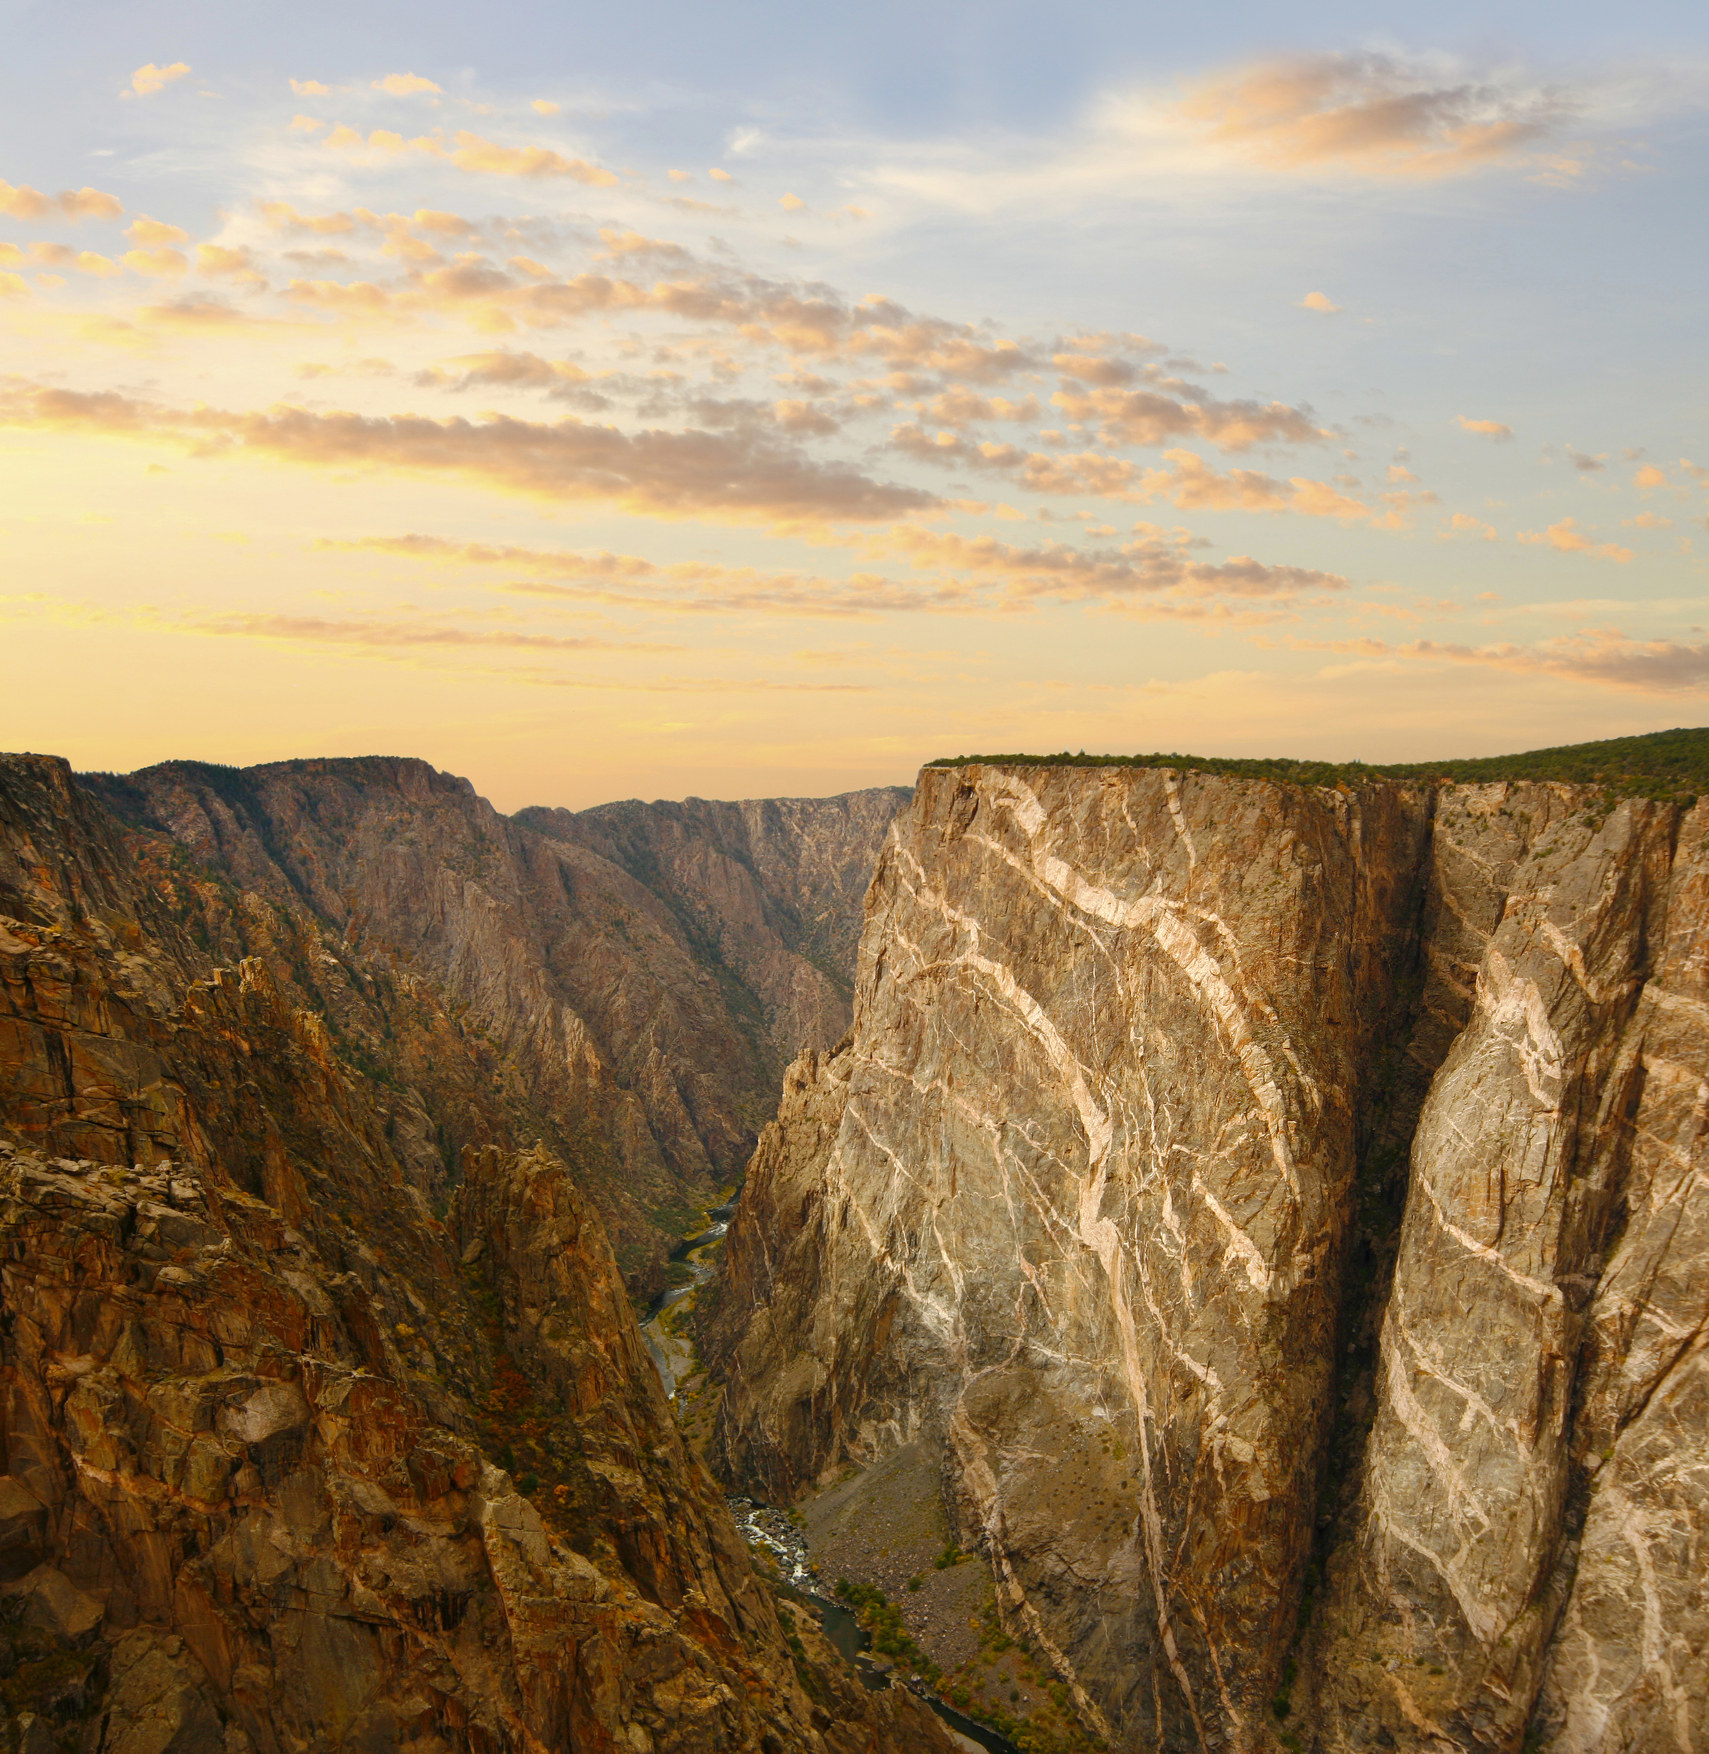 Black Canyon of the Gunnison National Park at sunset.